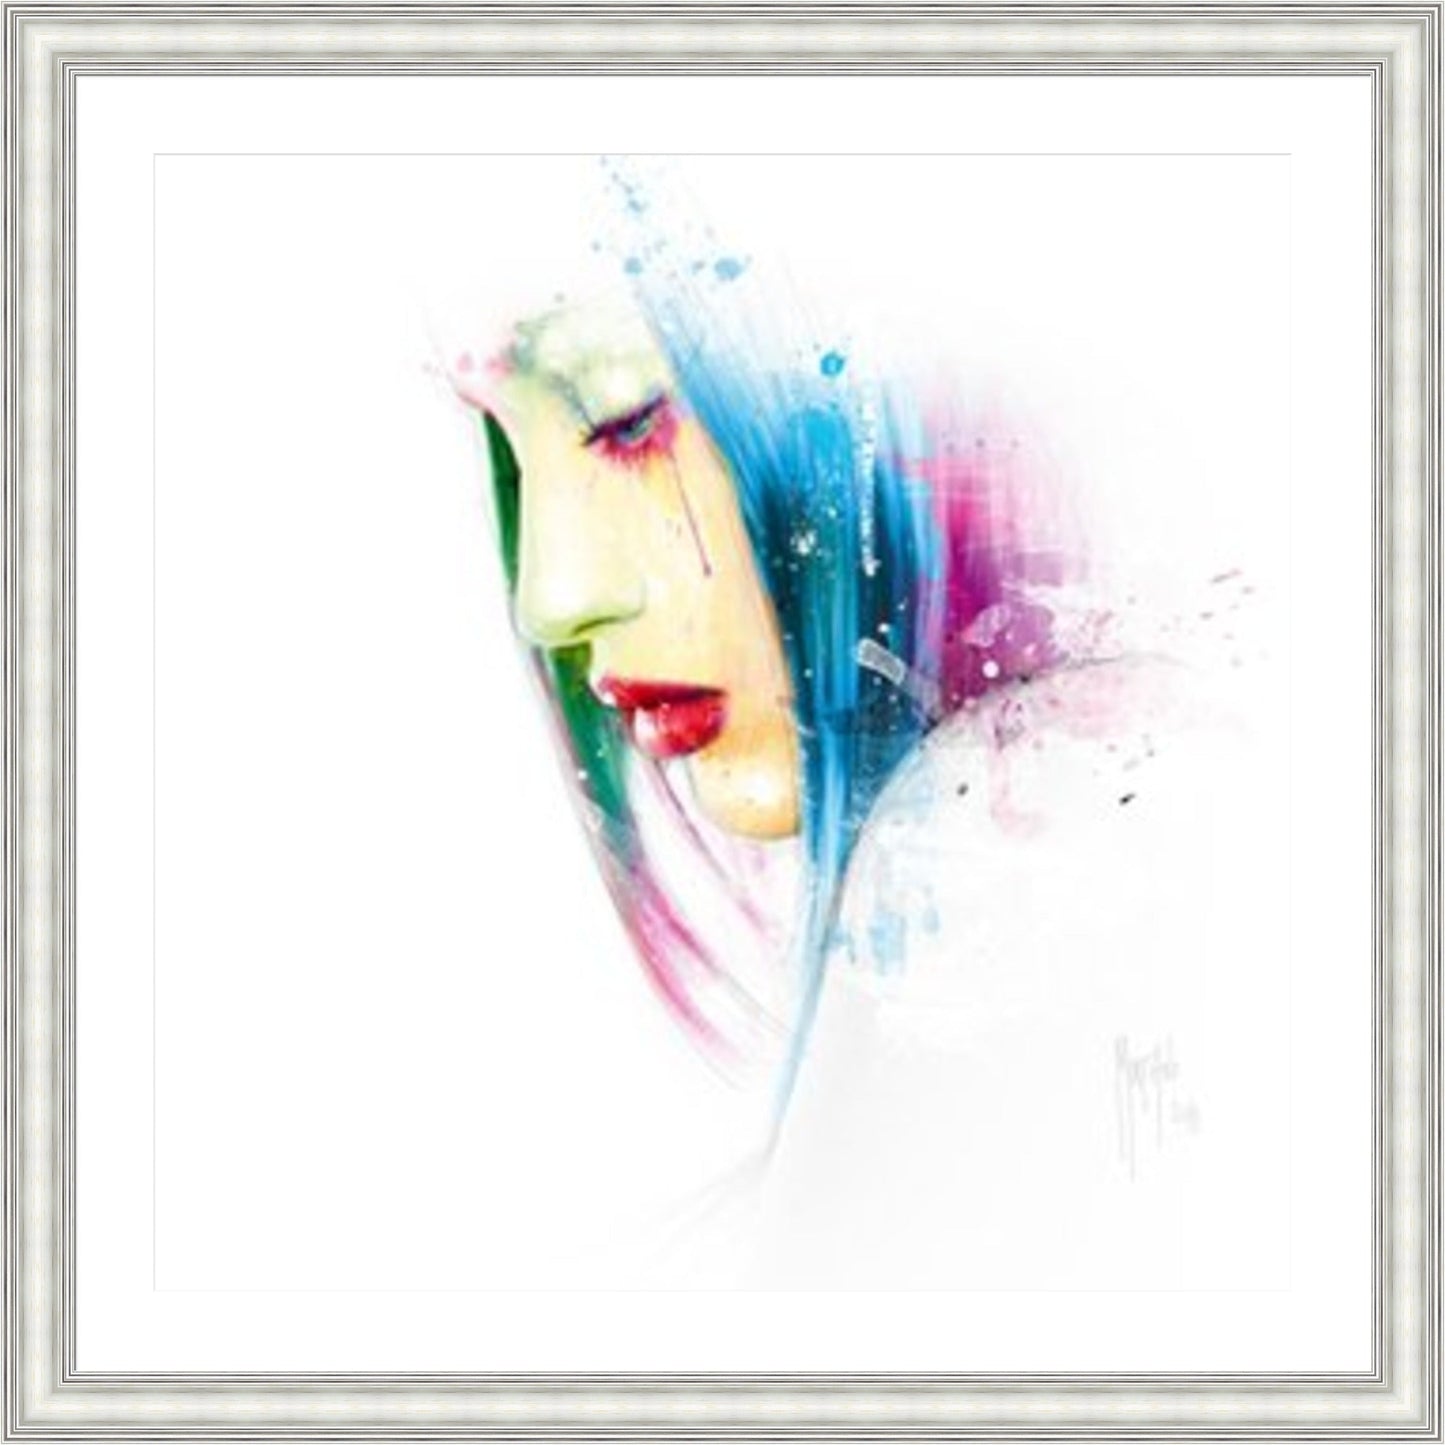 In Love by Patrice Murciano